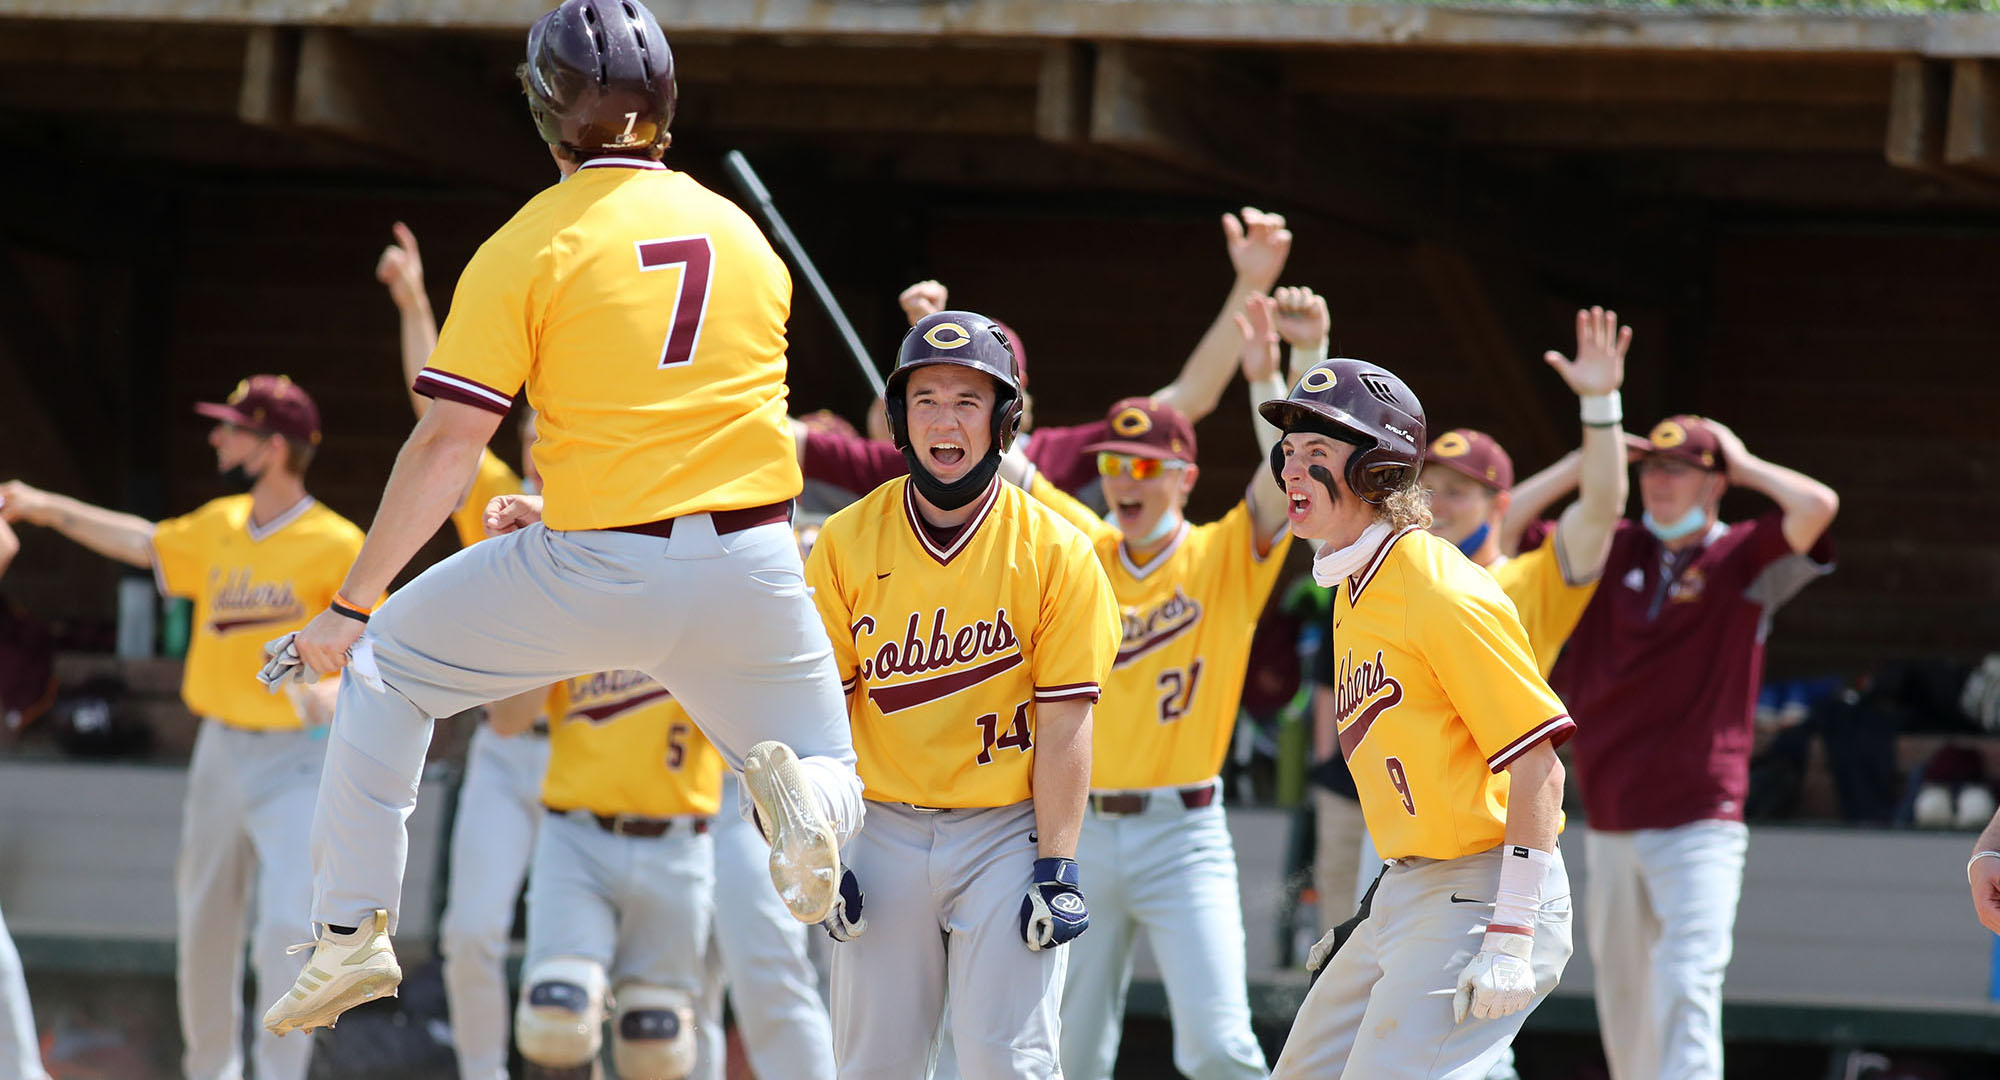 Sean McGuire (#7) jumps in the air after scoring in the eighth inning. Justin Kloster (#14) and Thomas Horan (#9) join in the celebration. (Photo courtesy of Caleb Williams, D3photography.com)